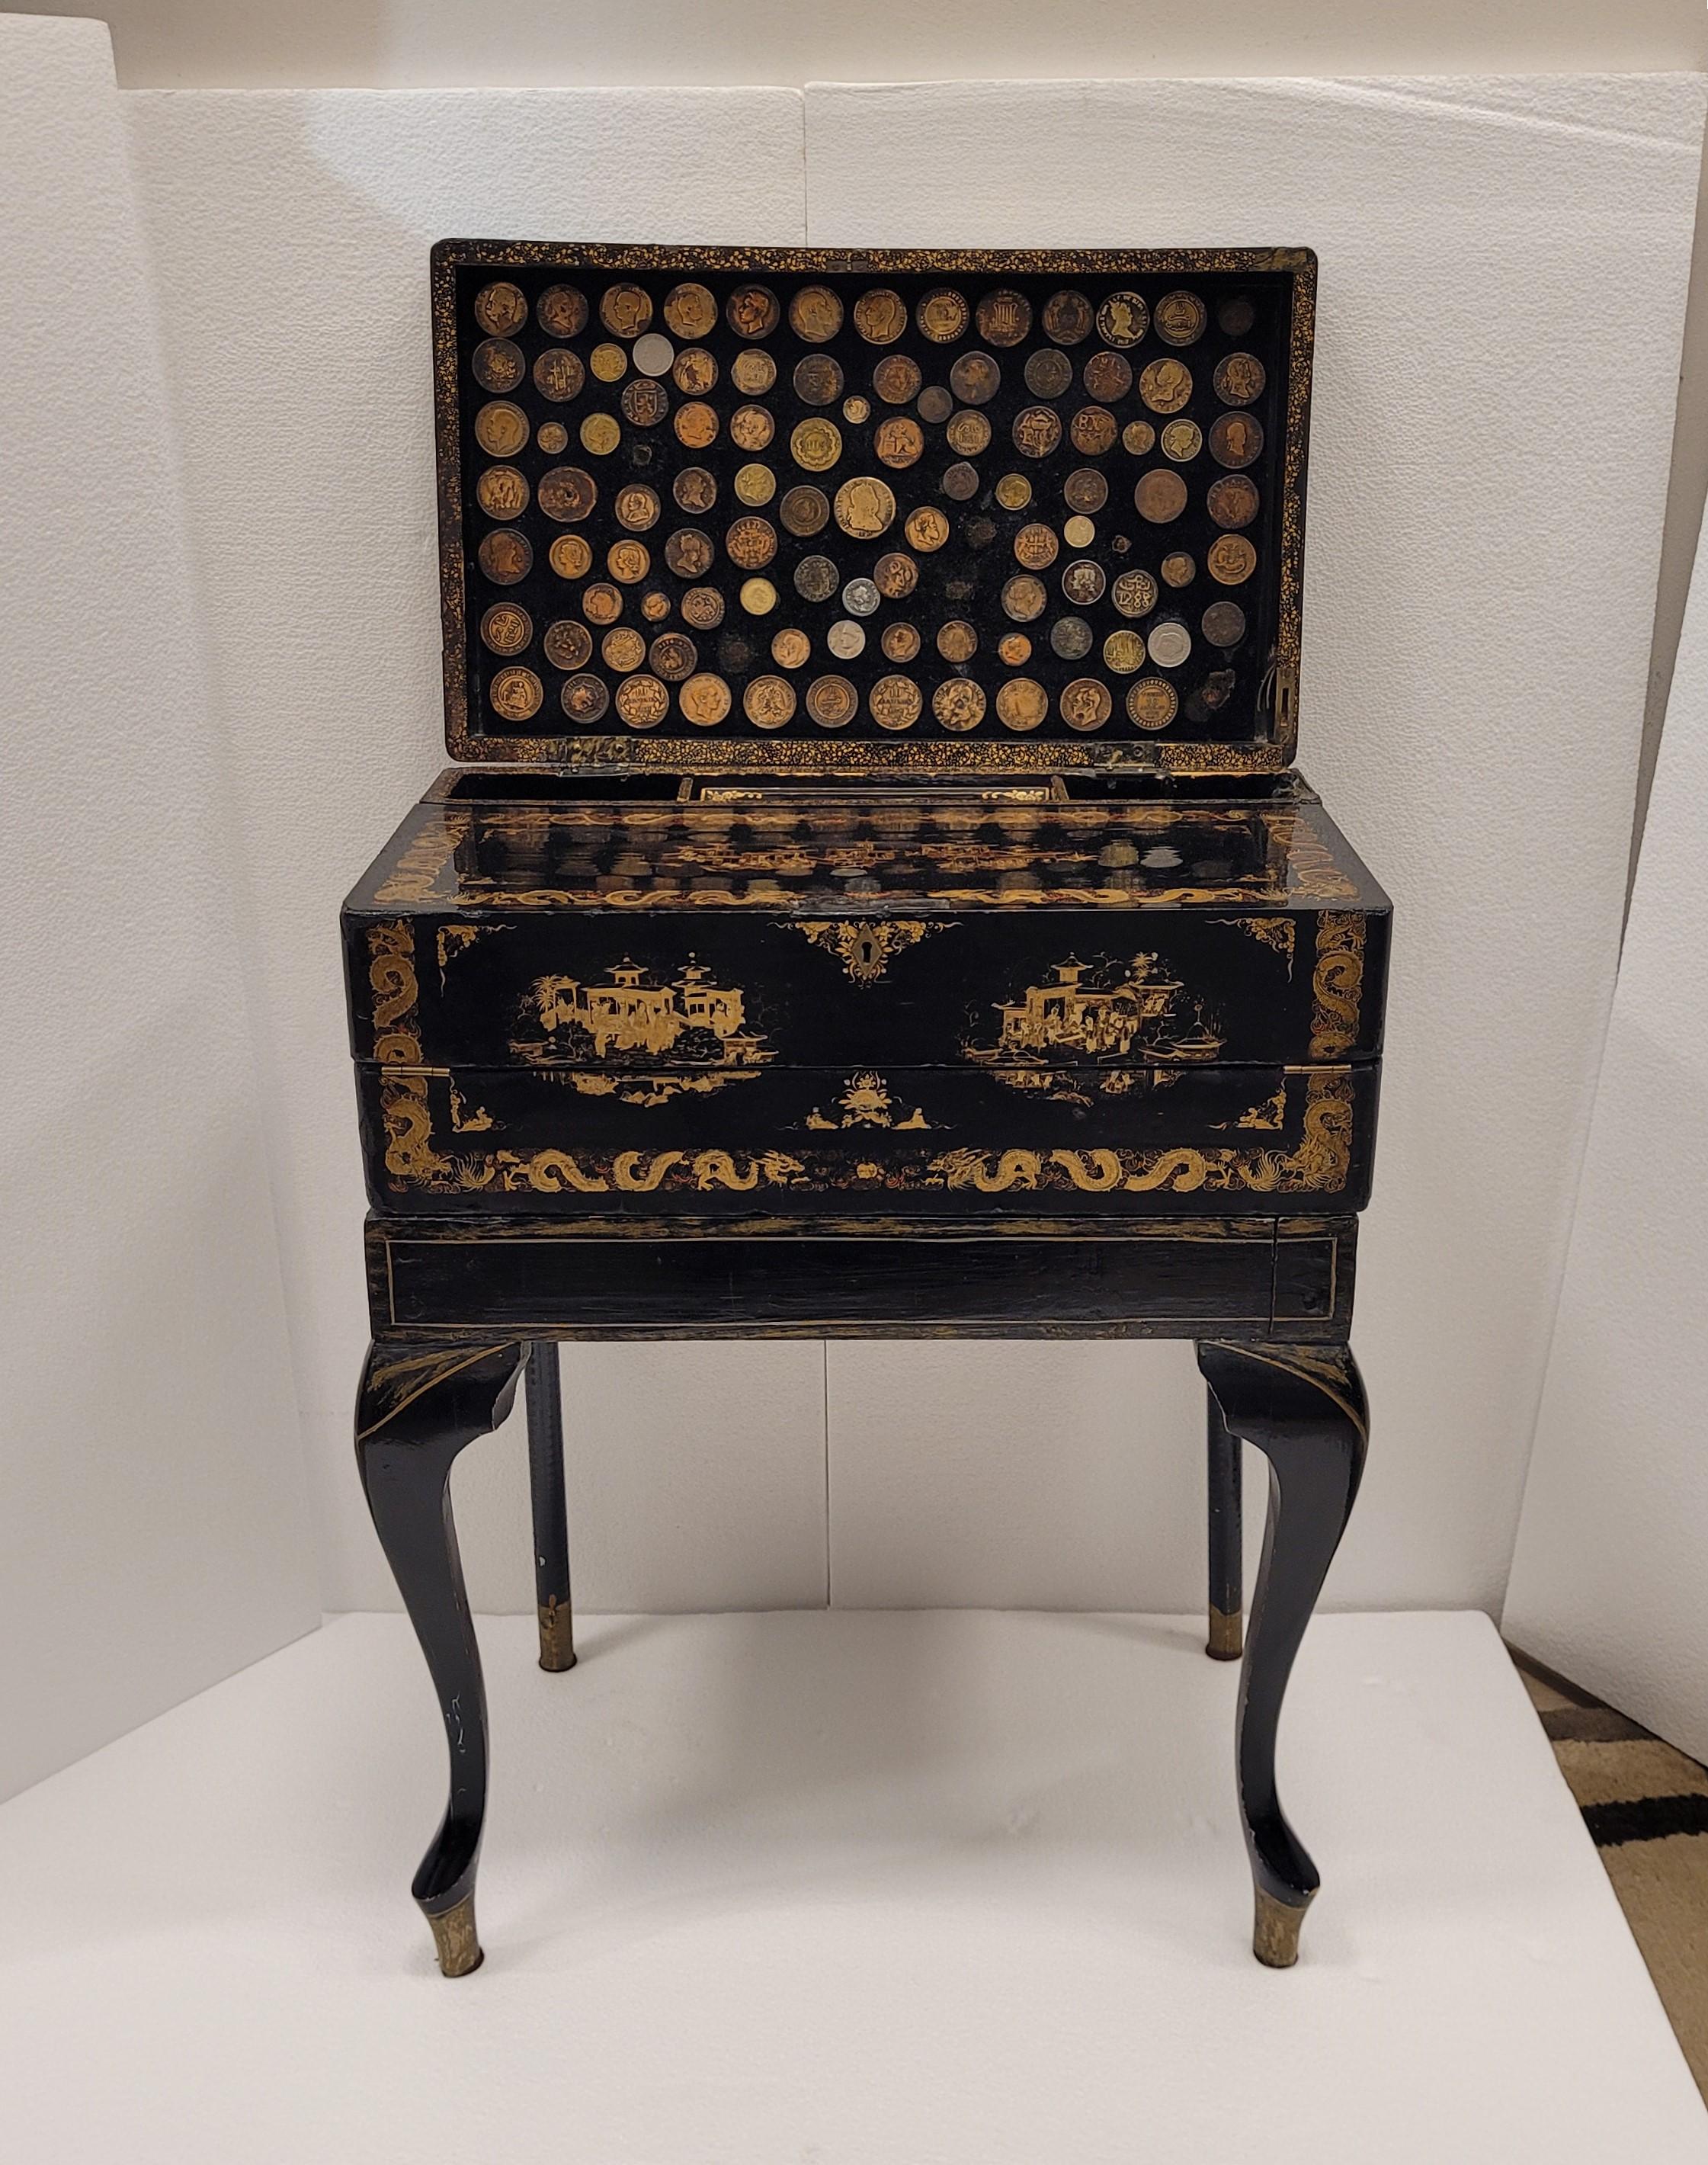 Travel desk made of lacquered and gilded wood with drawers inside, reserved scenes with figures in palatial environments surrounded by flowers, birds and Taoist symbols.

Exquisite English lap traveling desk portable. Countryside writing bureau in